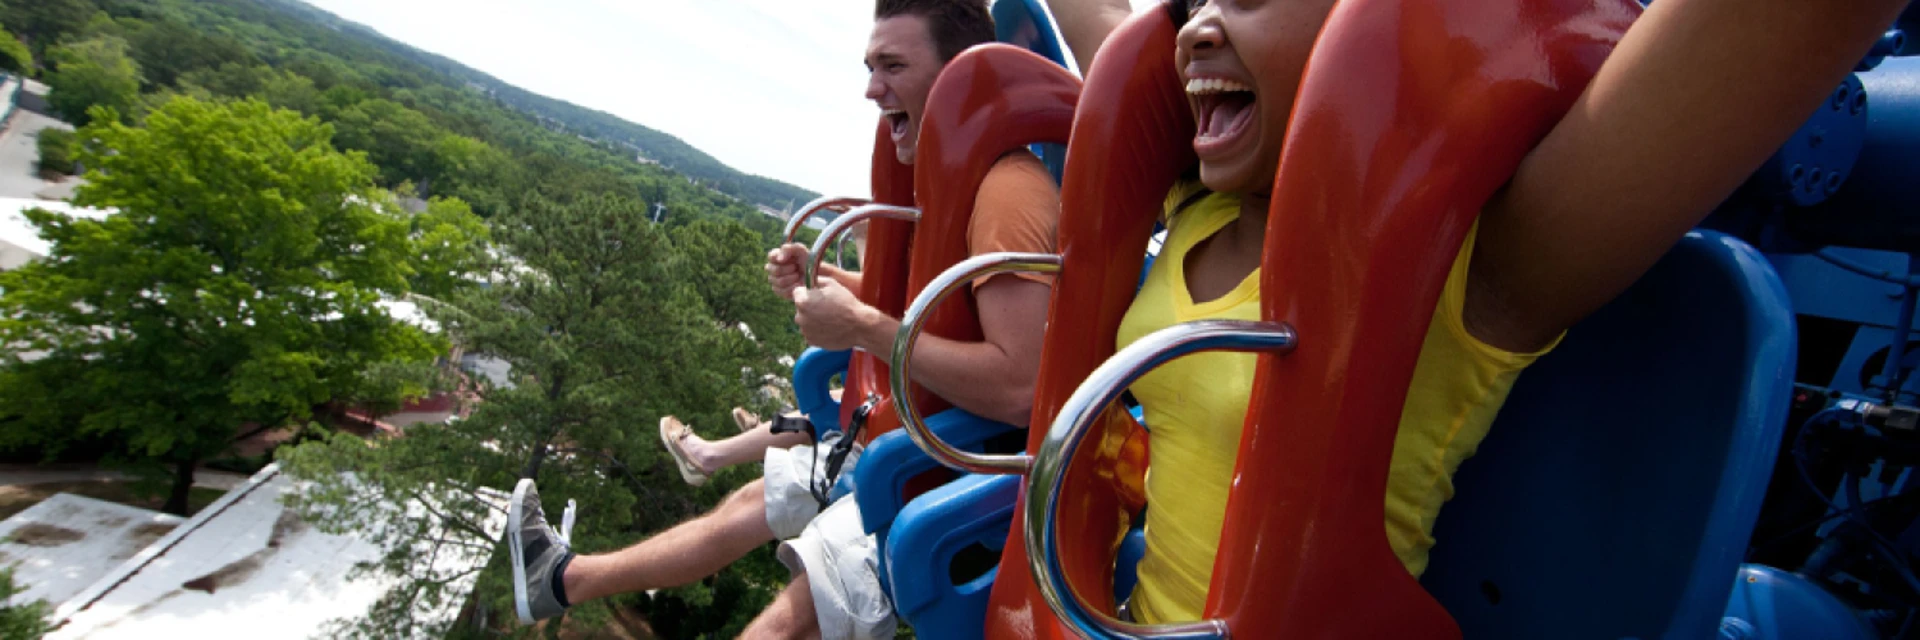 AAA OFFERS THRILLING SAVINGS FOR NATIONAL ROLLER COASTER DAY